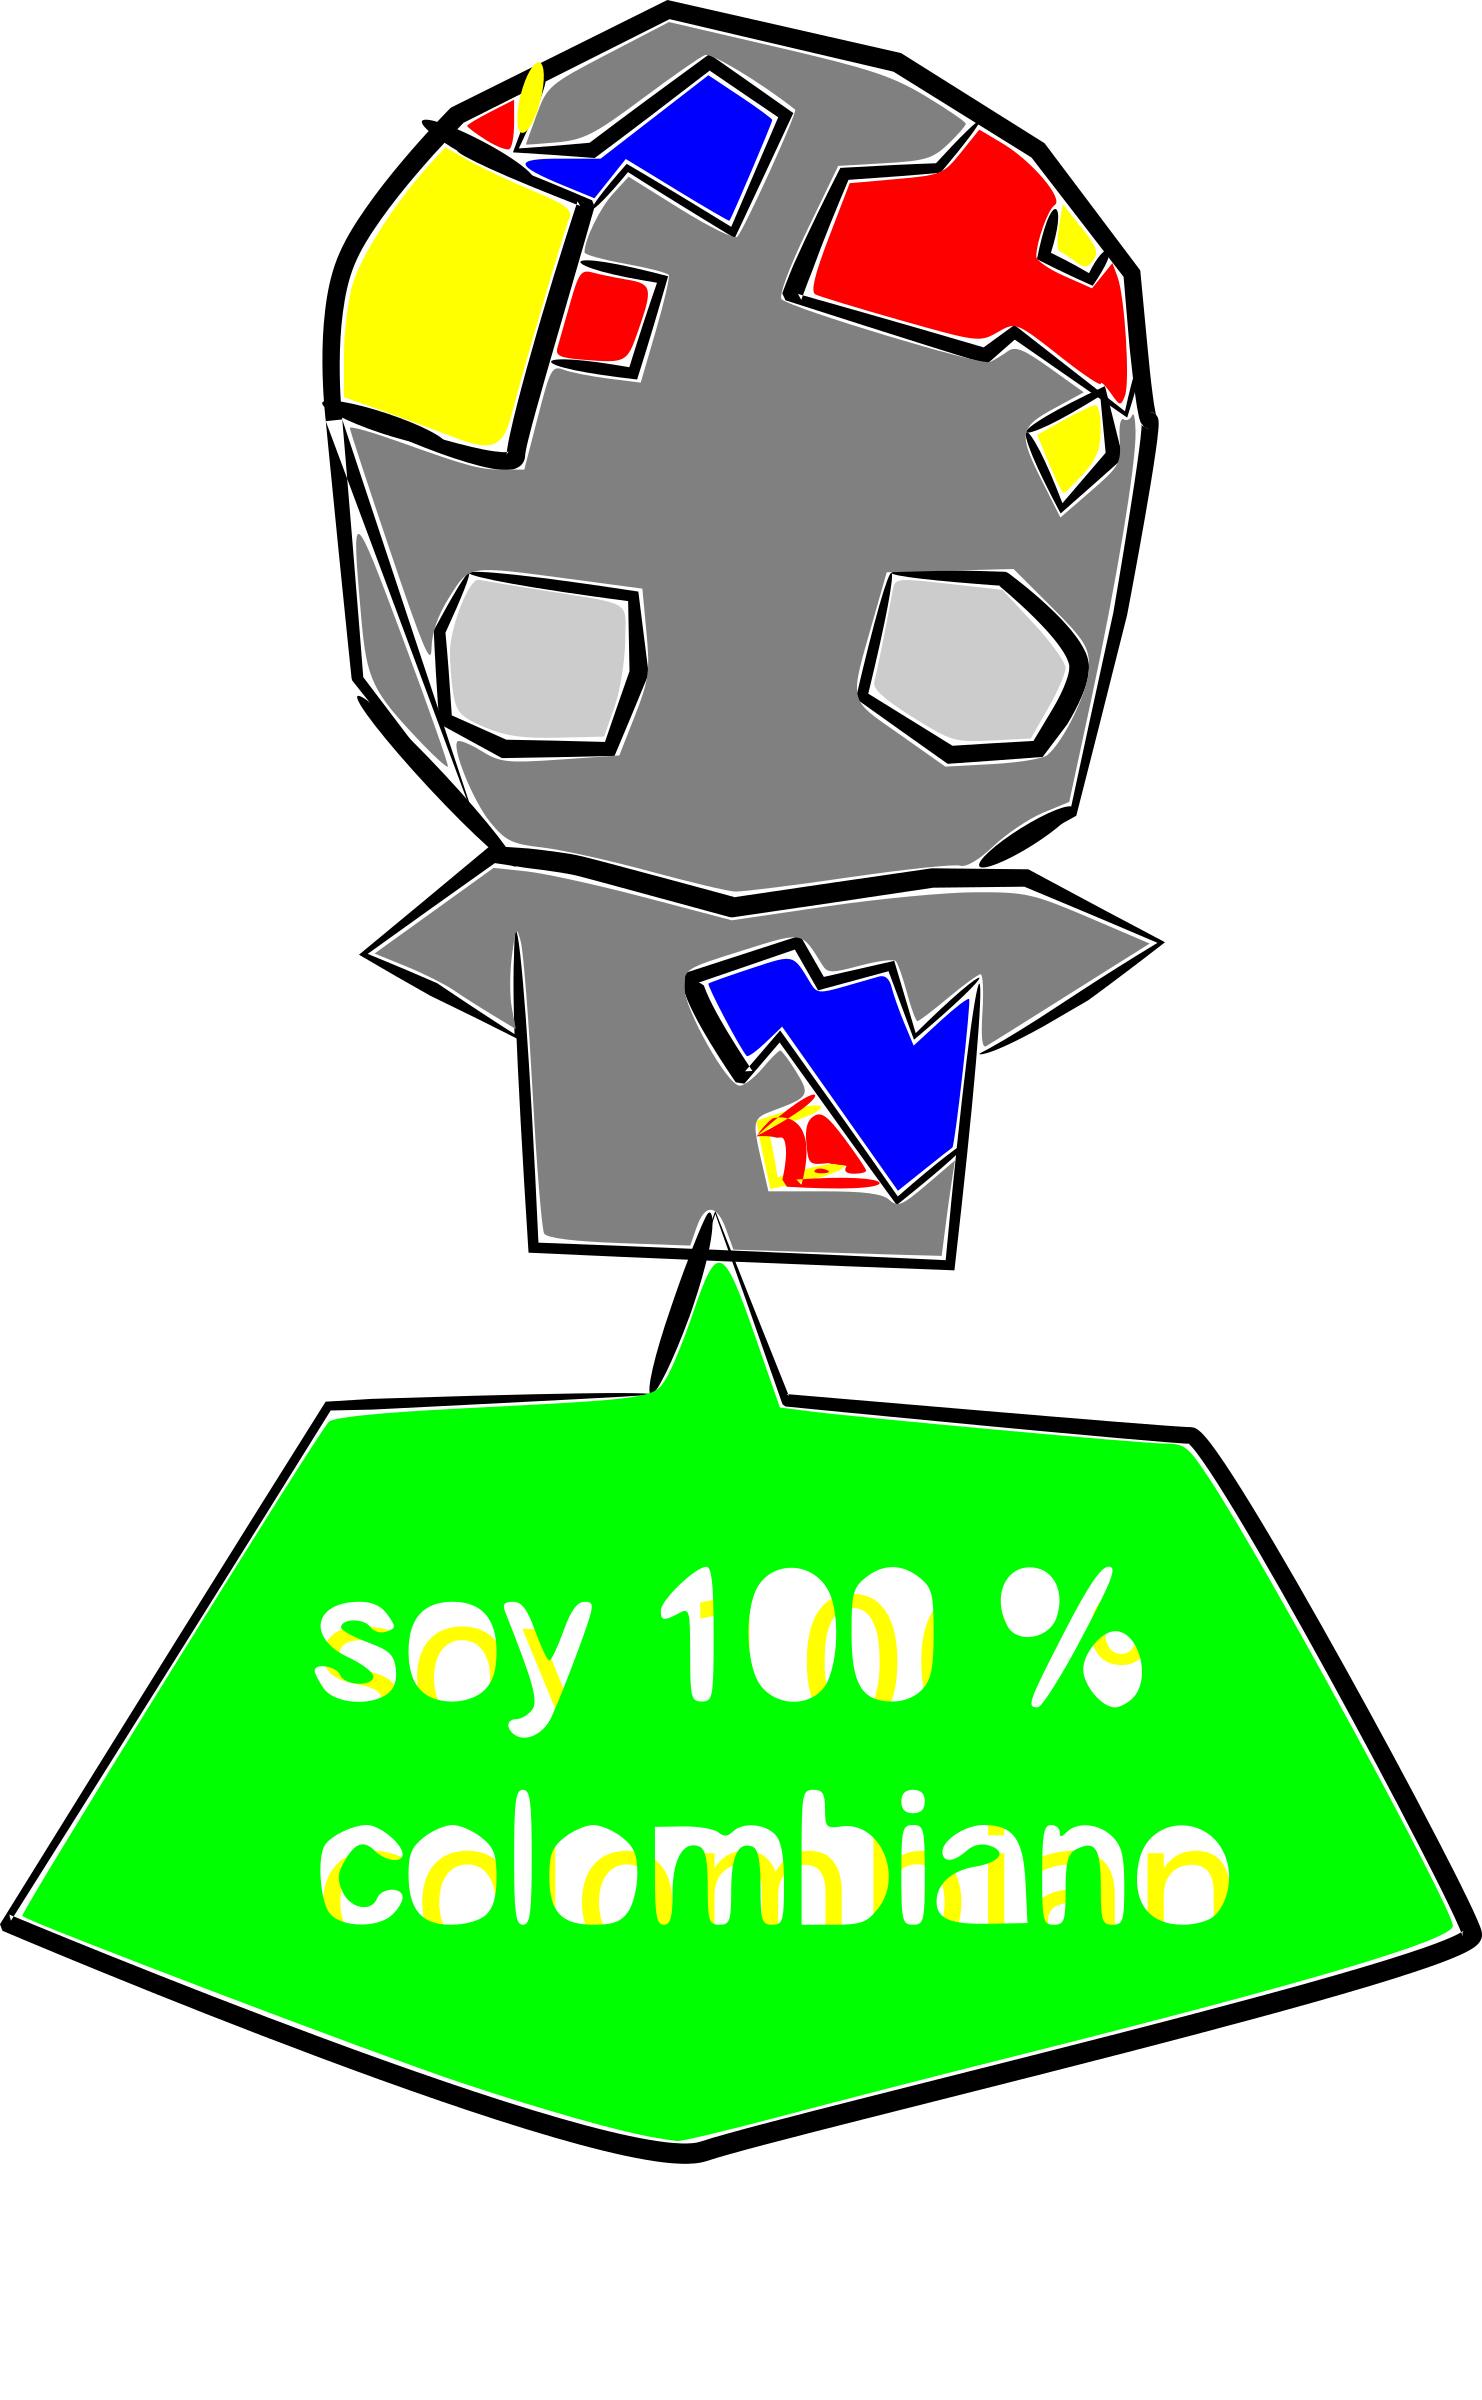 soy 100 % colombiano PNG icons